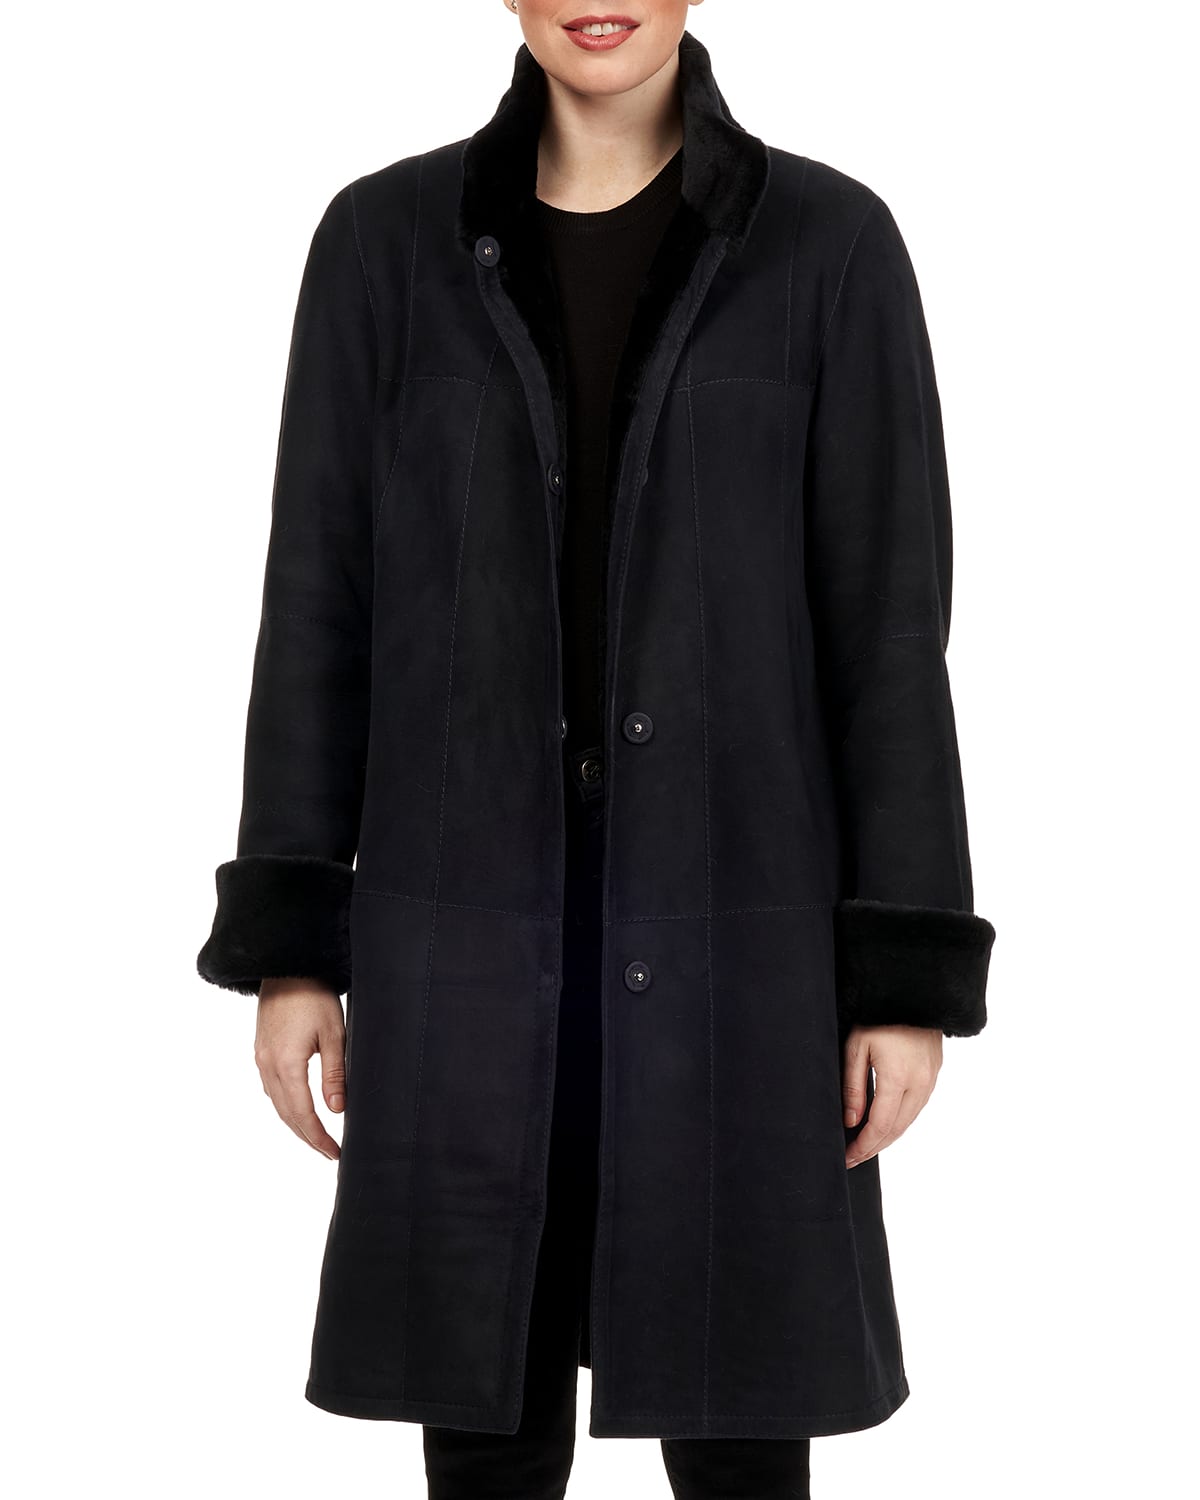 Omoone Women's Basic Stand Collar Slim Fit Jacket Pea Coat Notched Lapel Trench Coat 